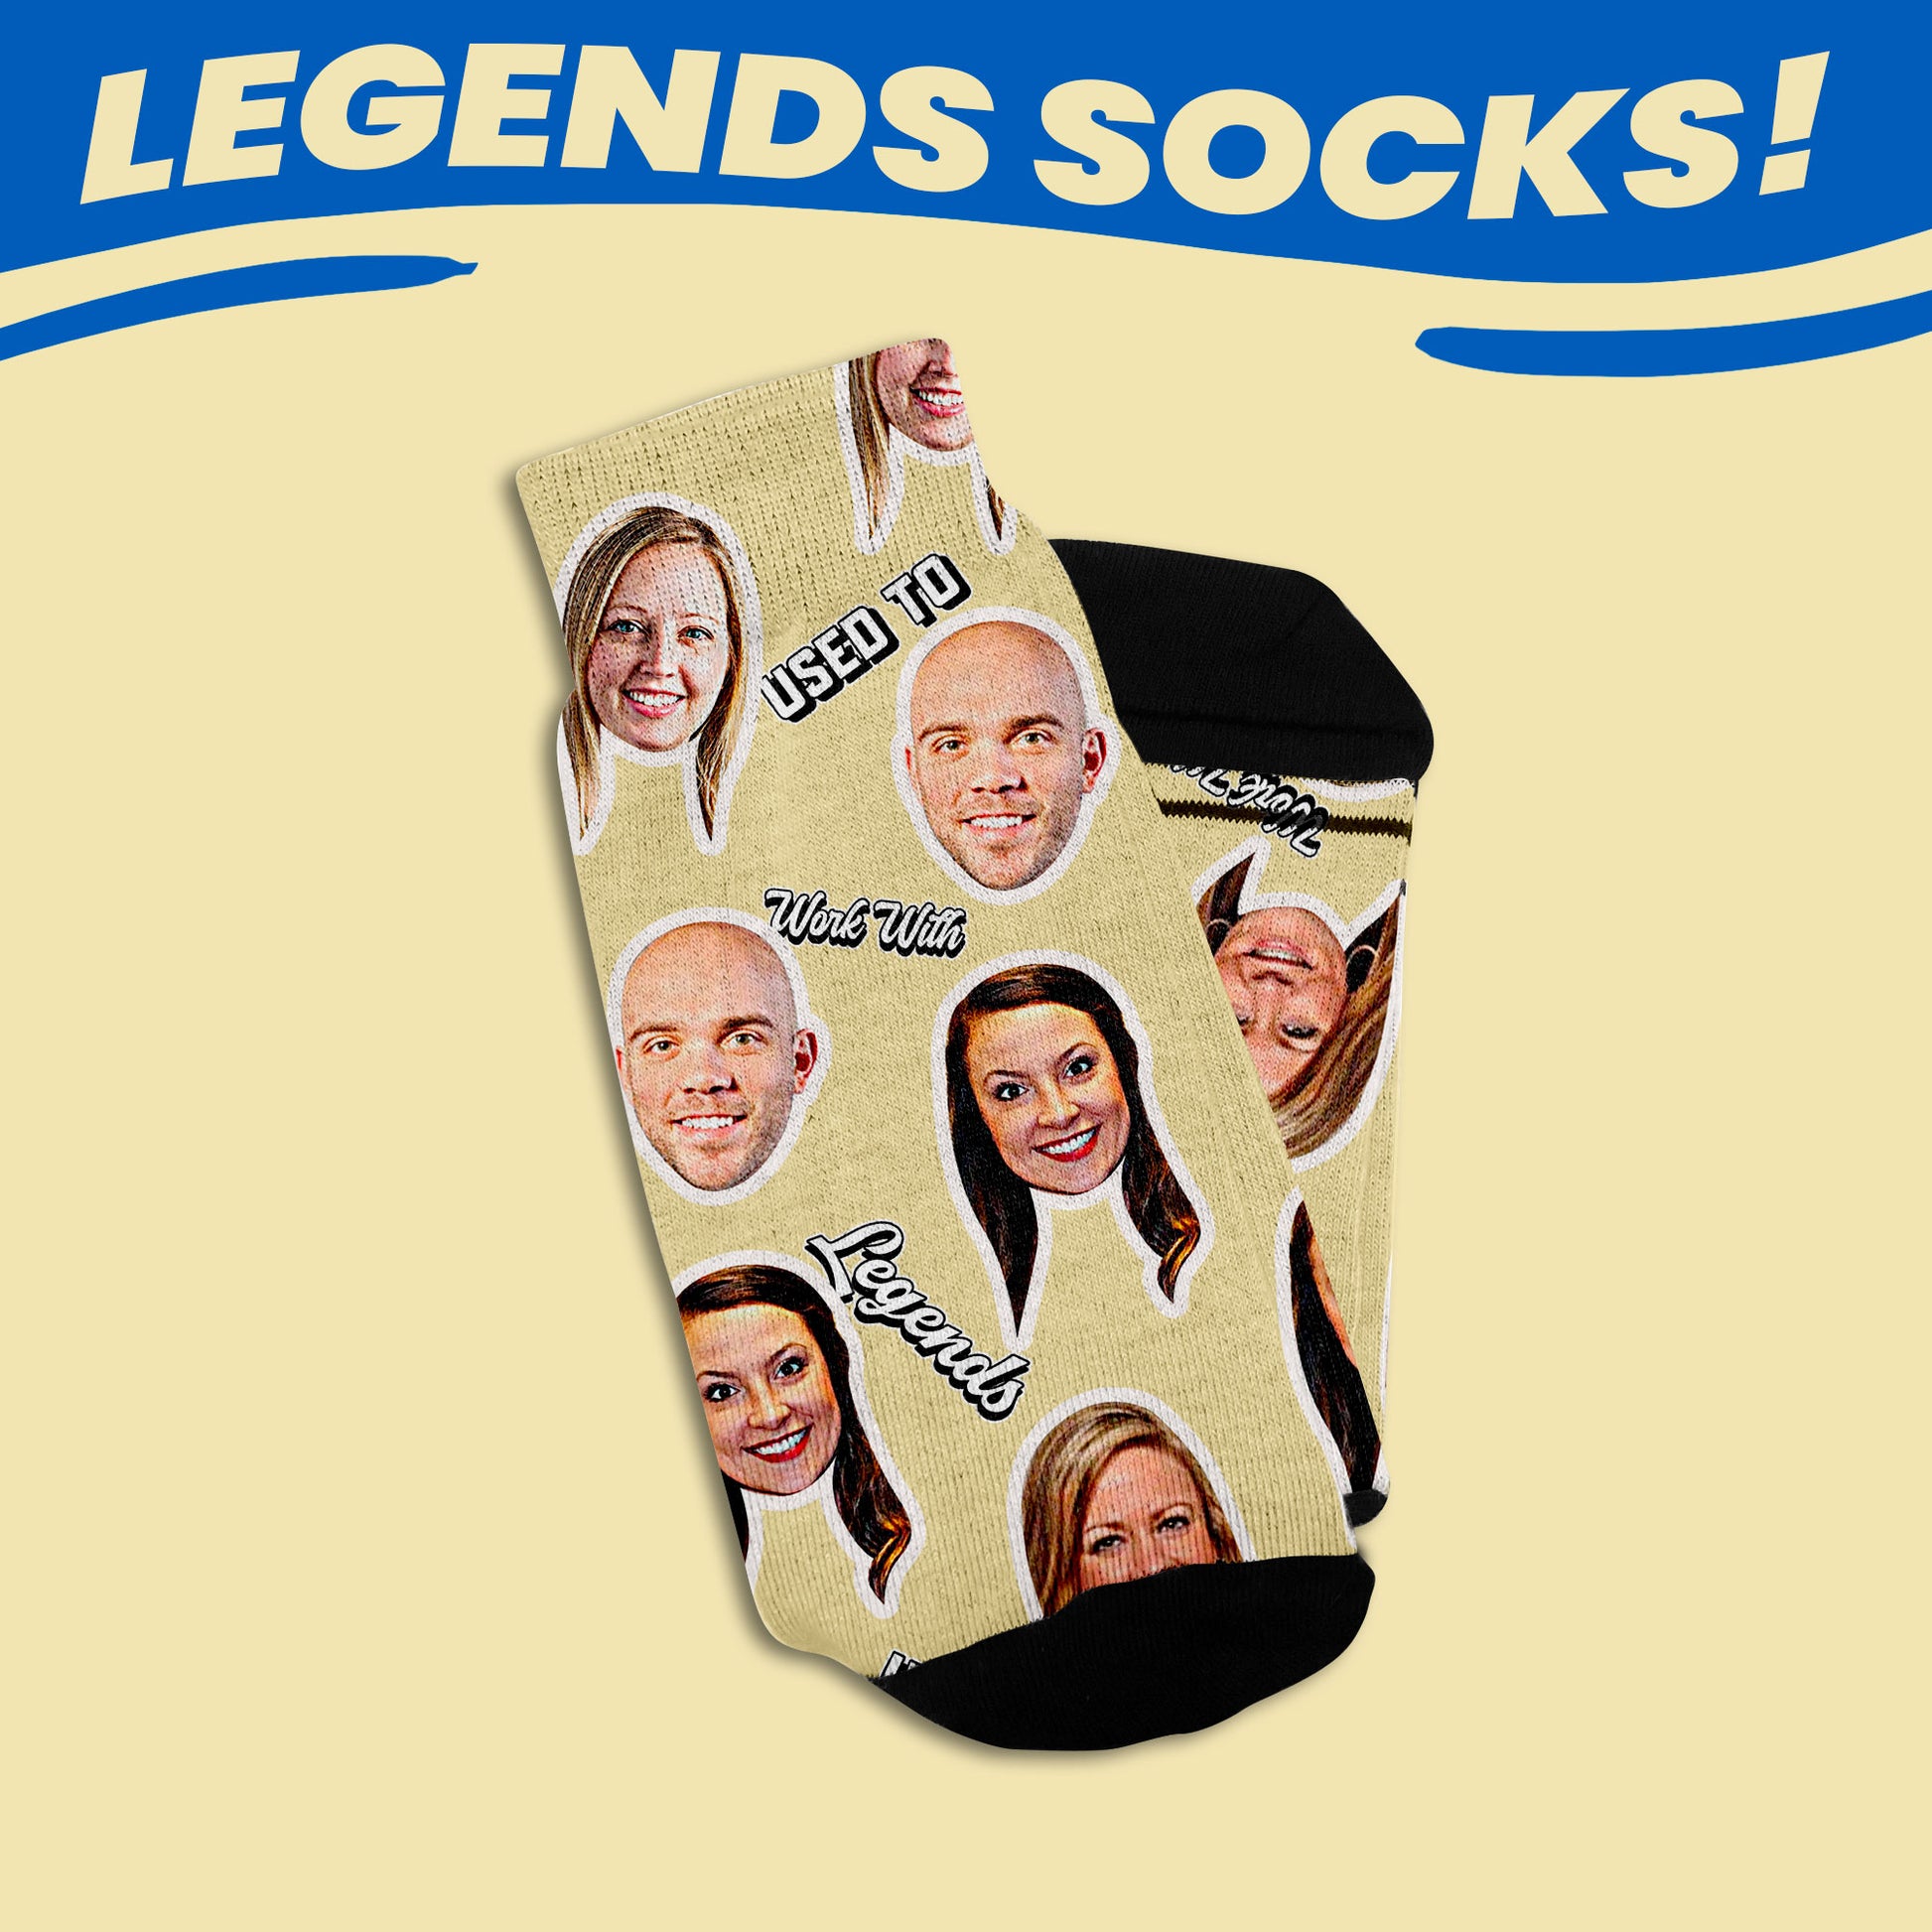 personalized socks with used to work with legends text in beige